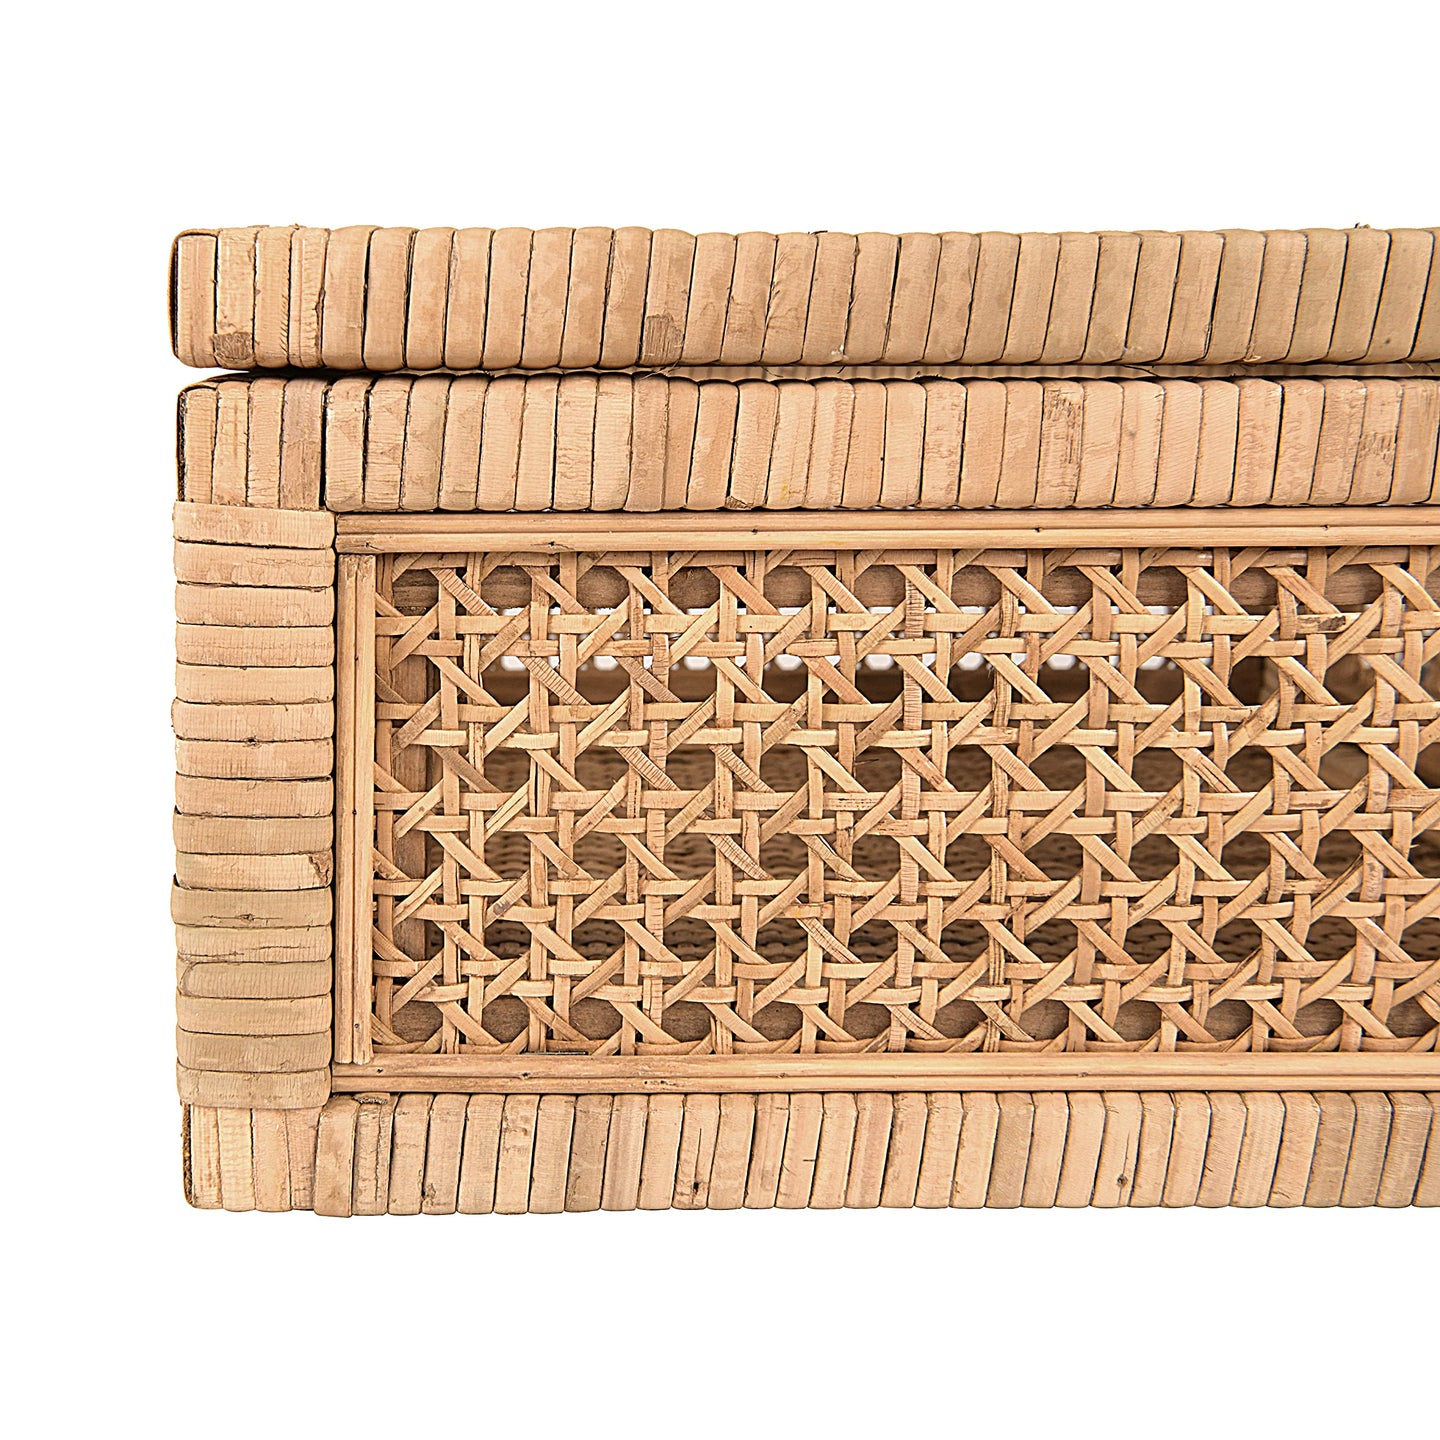 Creative Co-Op Modern Decorative Square Woven Rattan and Wood Display Boxes with Glass Top, Set of 2 Sizes, Natural Finish